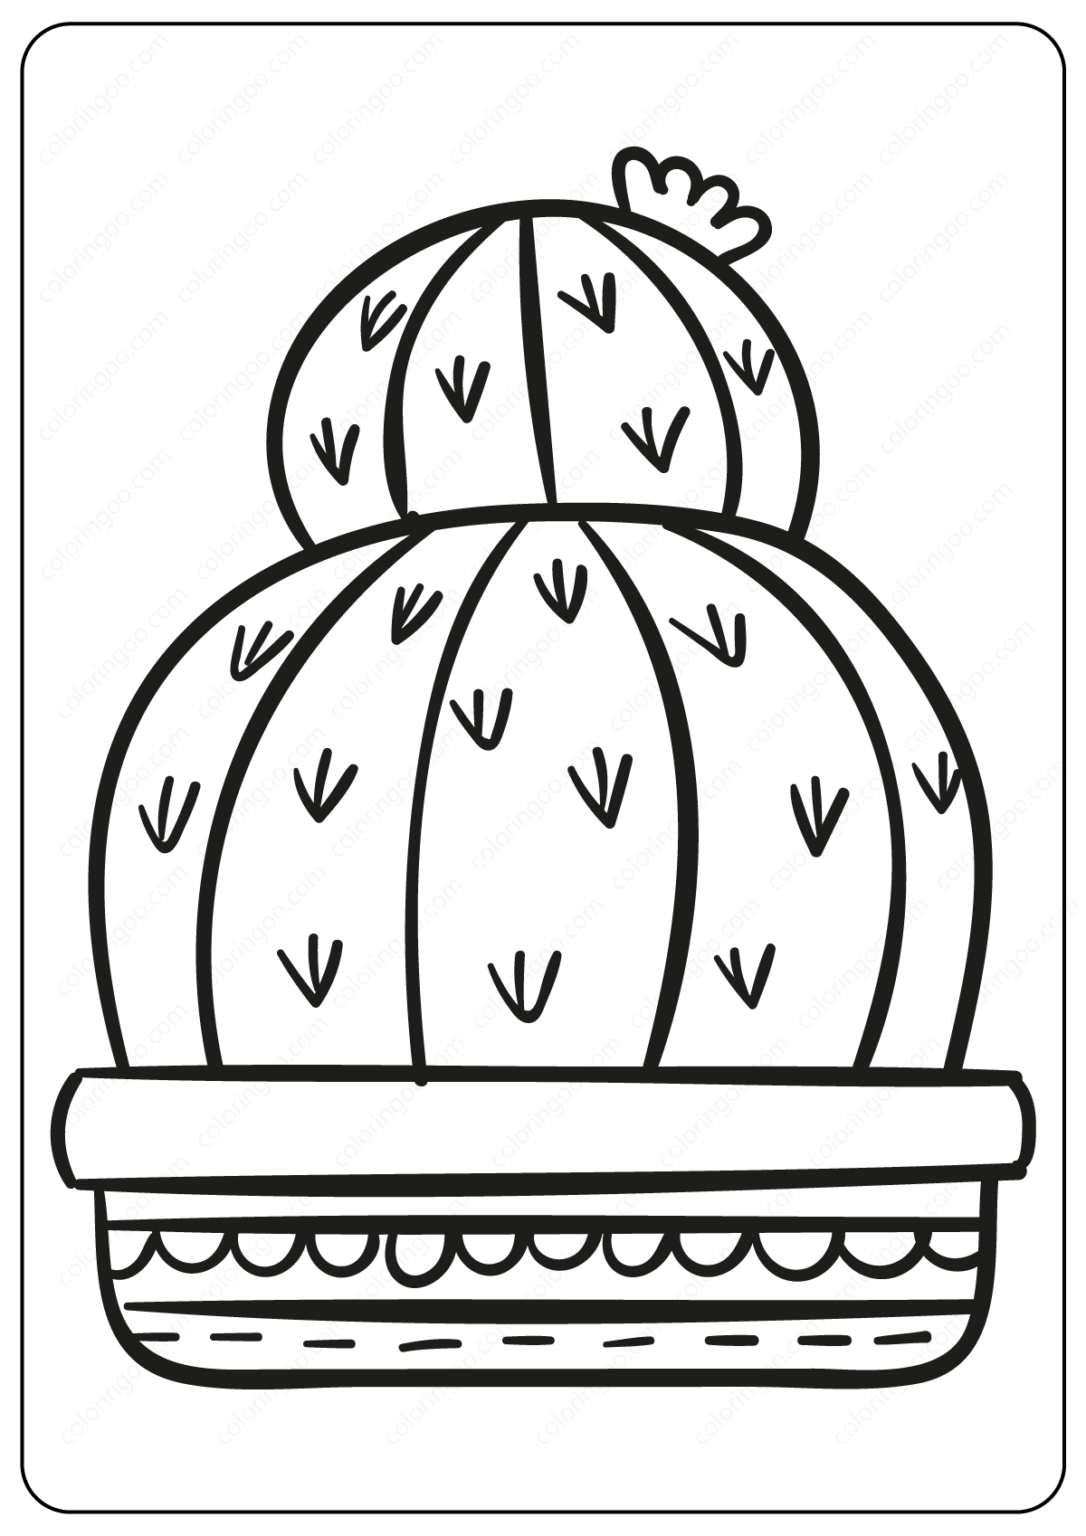 Cute Prickly Cactus Coloring Pages Book - Free Printable Coloring Pages